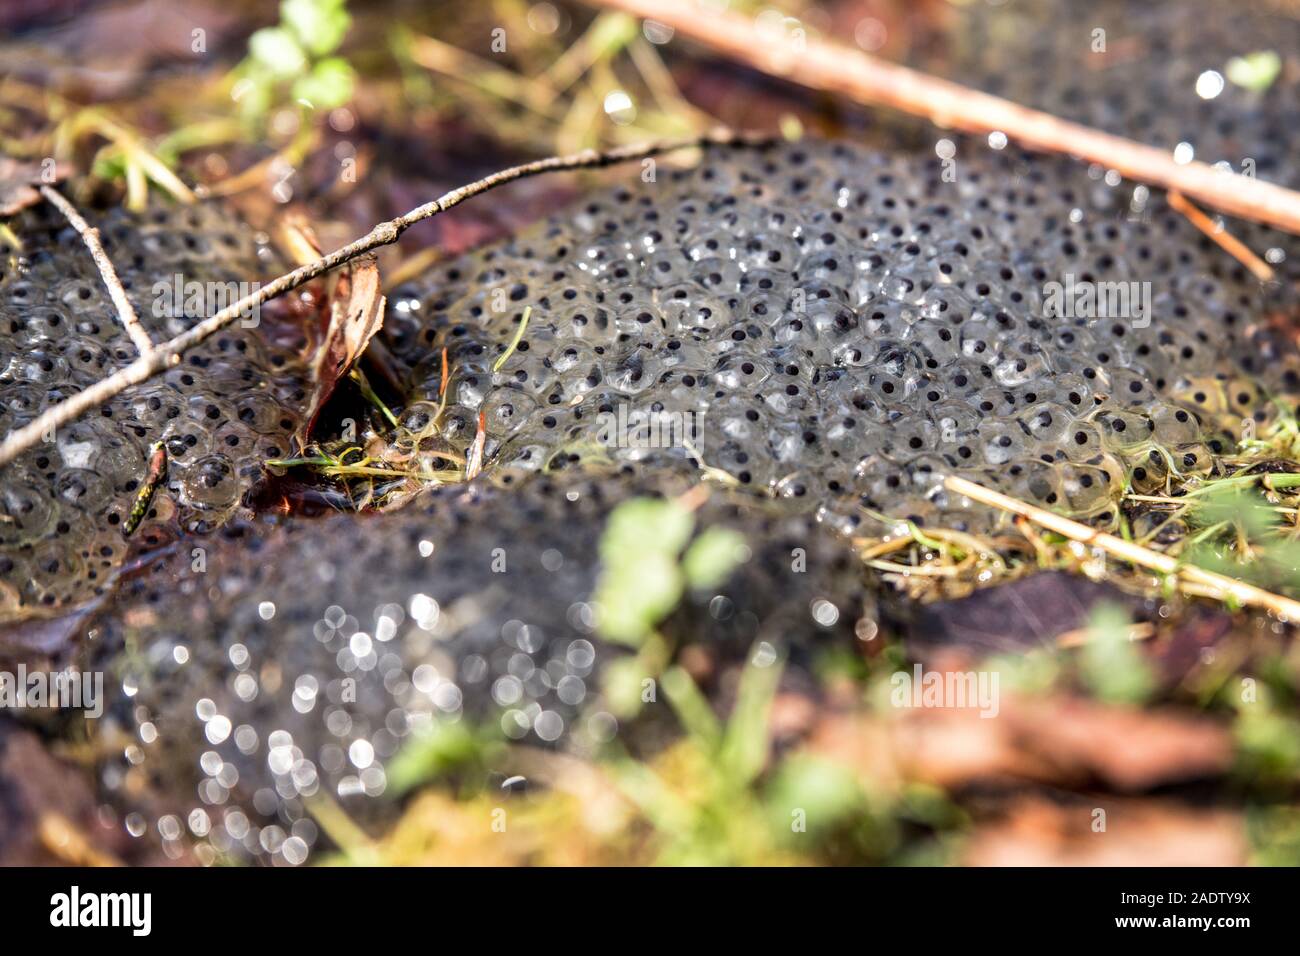 many frog spawn into a muddy soil, danger to drying up or dehydration Stock Photo